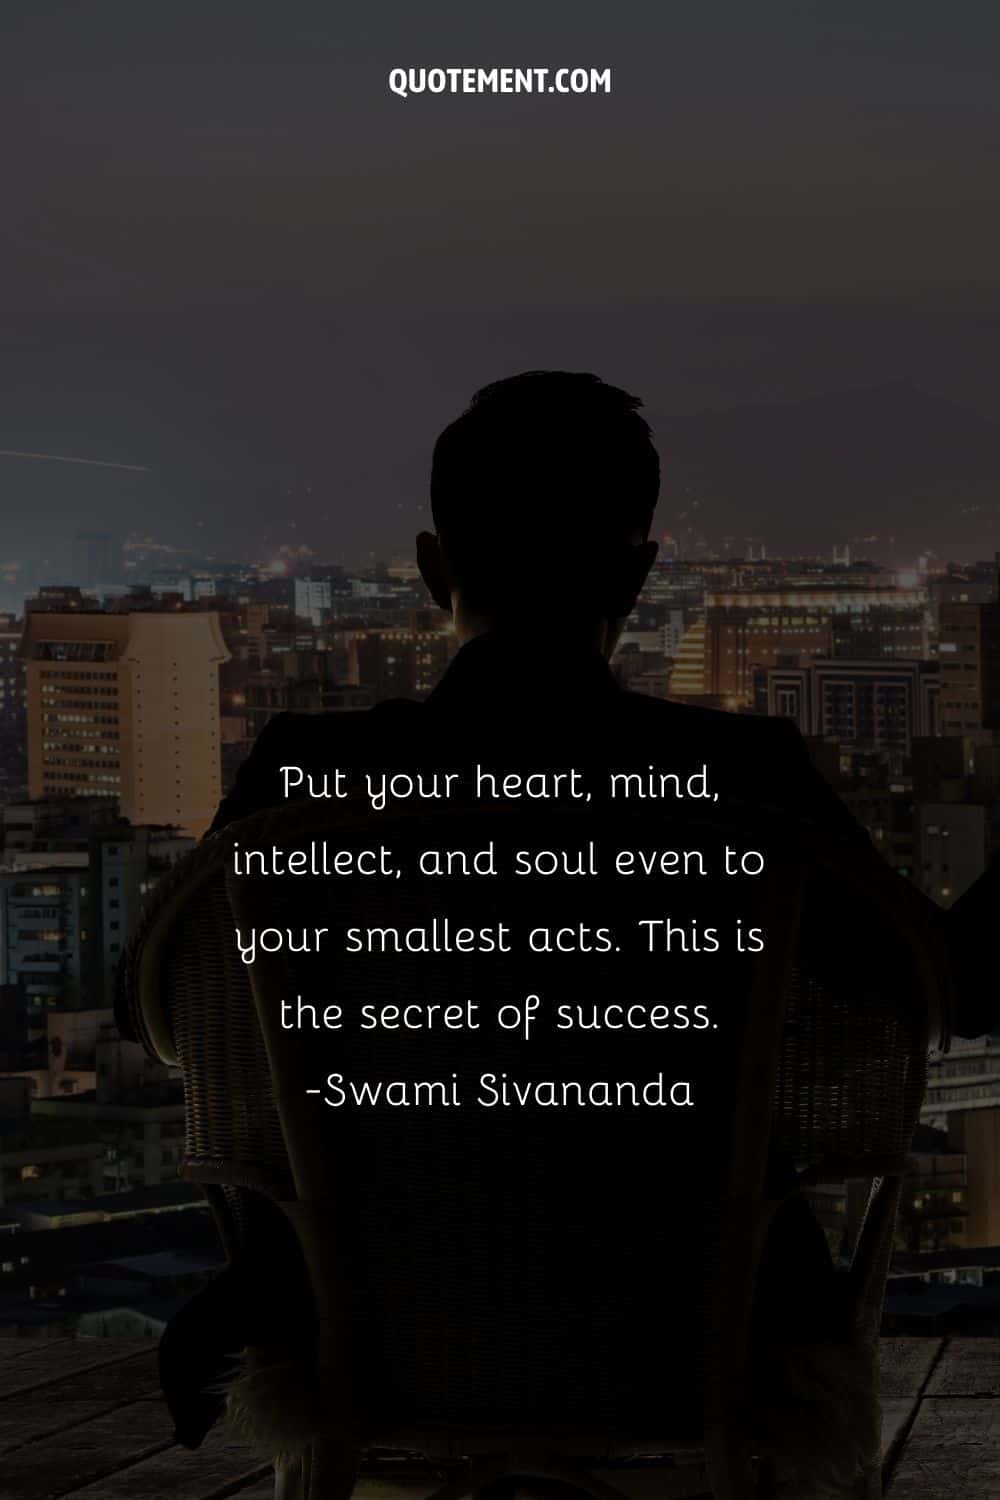 Put your heart, mind, intellect, and soul even to your smallest acts